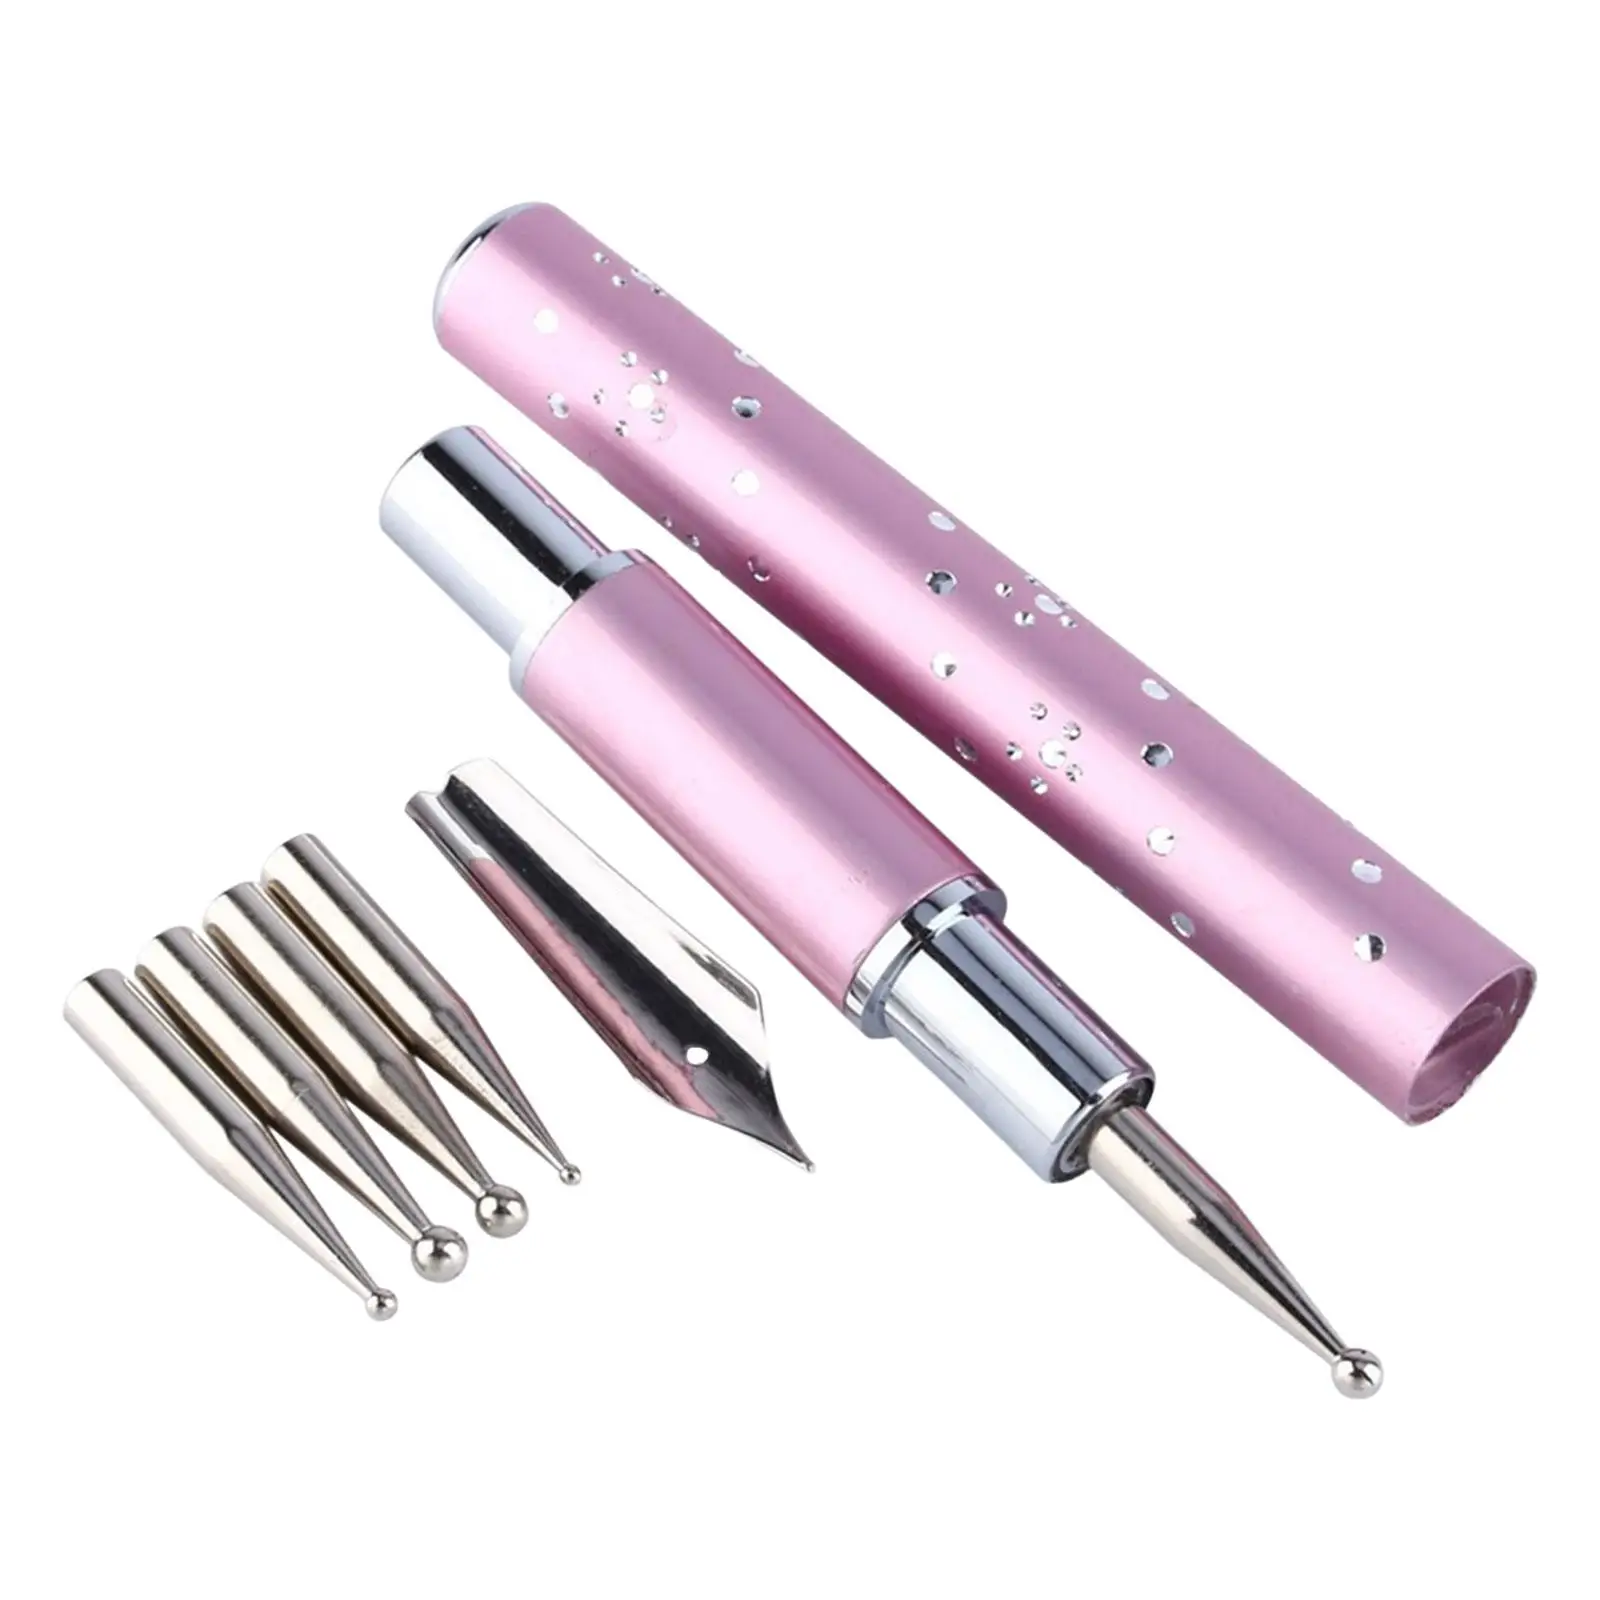 Nail Art Fountain Pen with 5 Replacement Heads Nail Art Paint Pen for Home